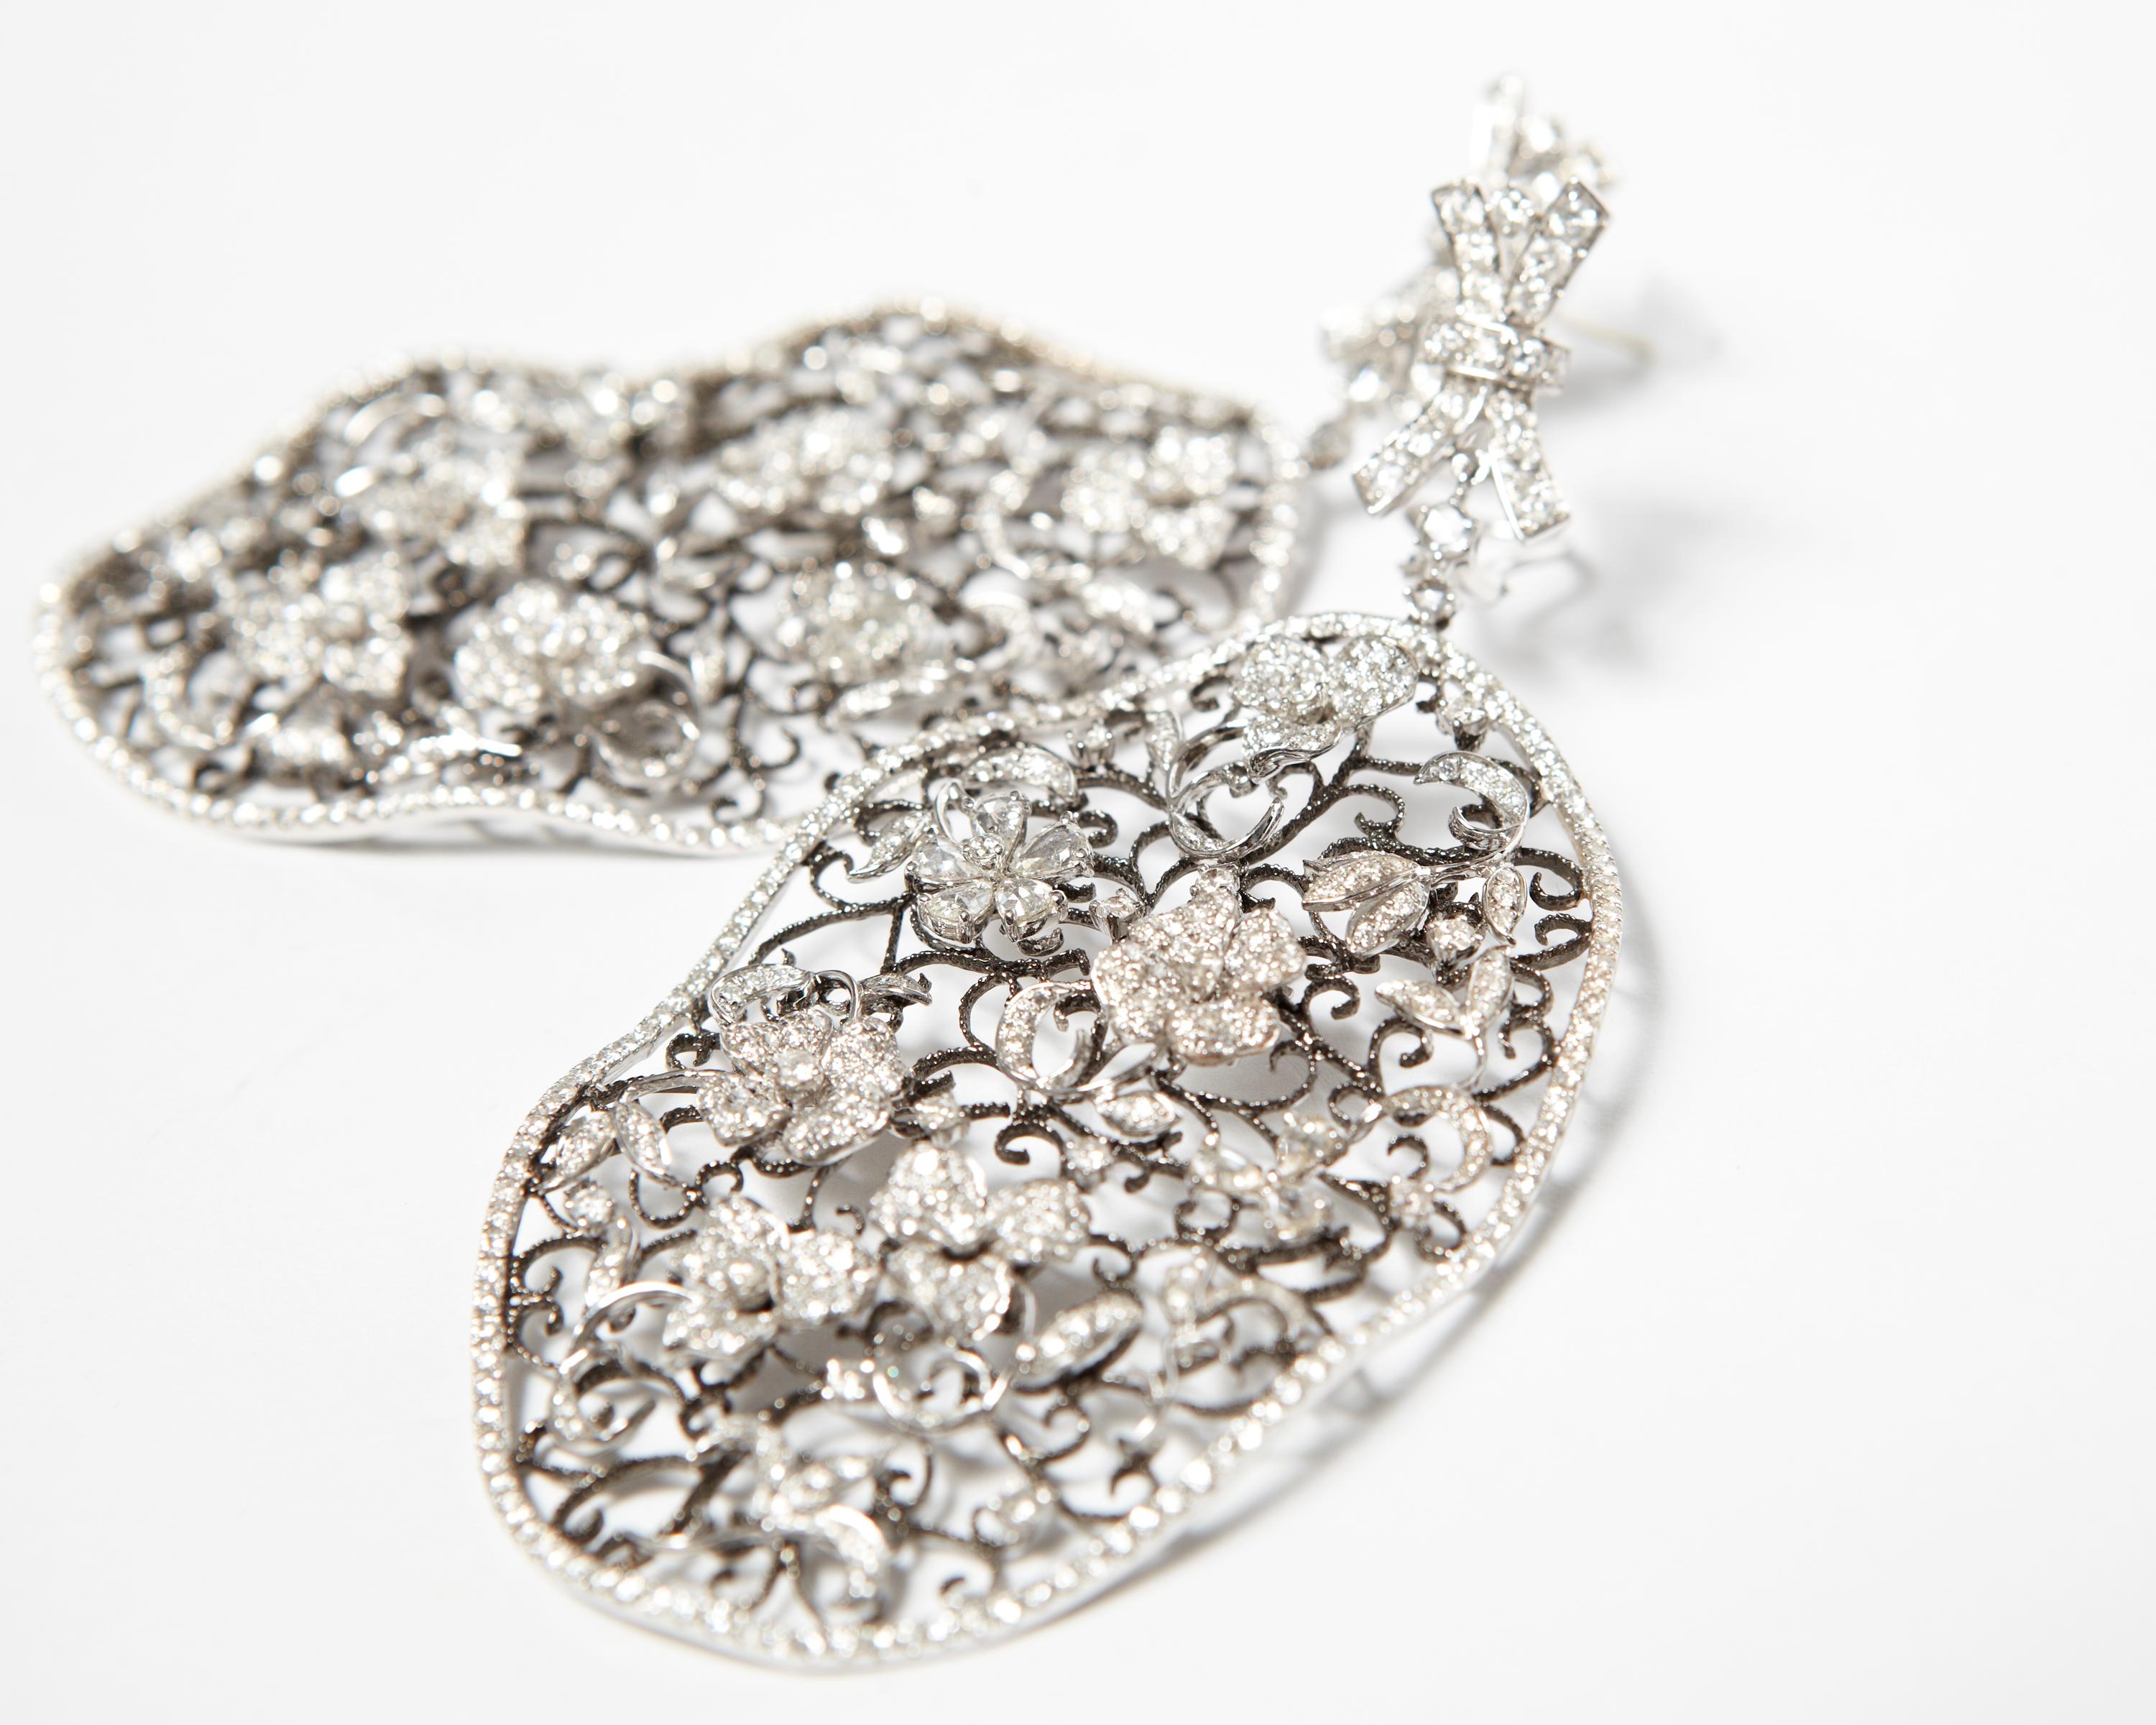 Pair of Helen Yarmak Designer 18KT White Gold and Diamond with Sculptural Flowers and Filigree Workmanship